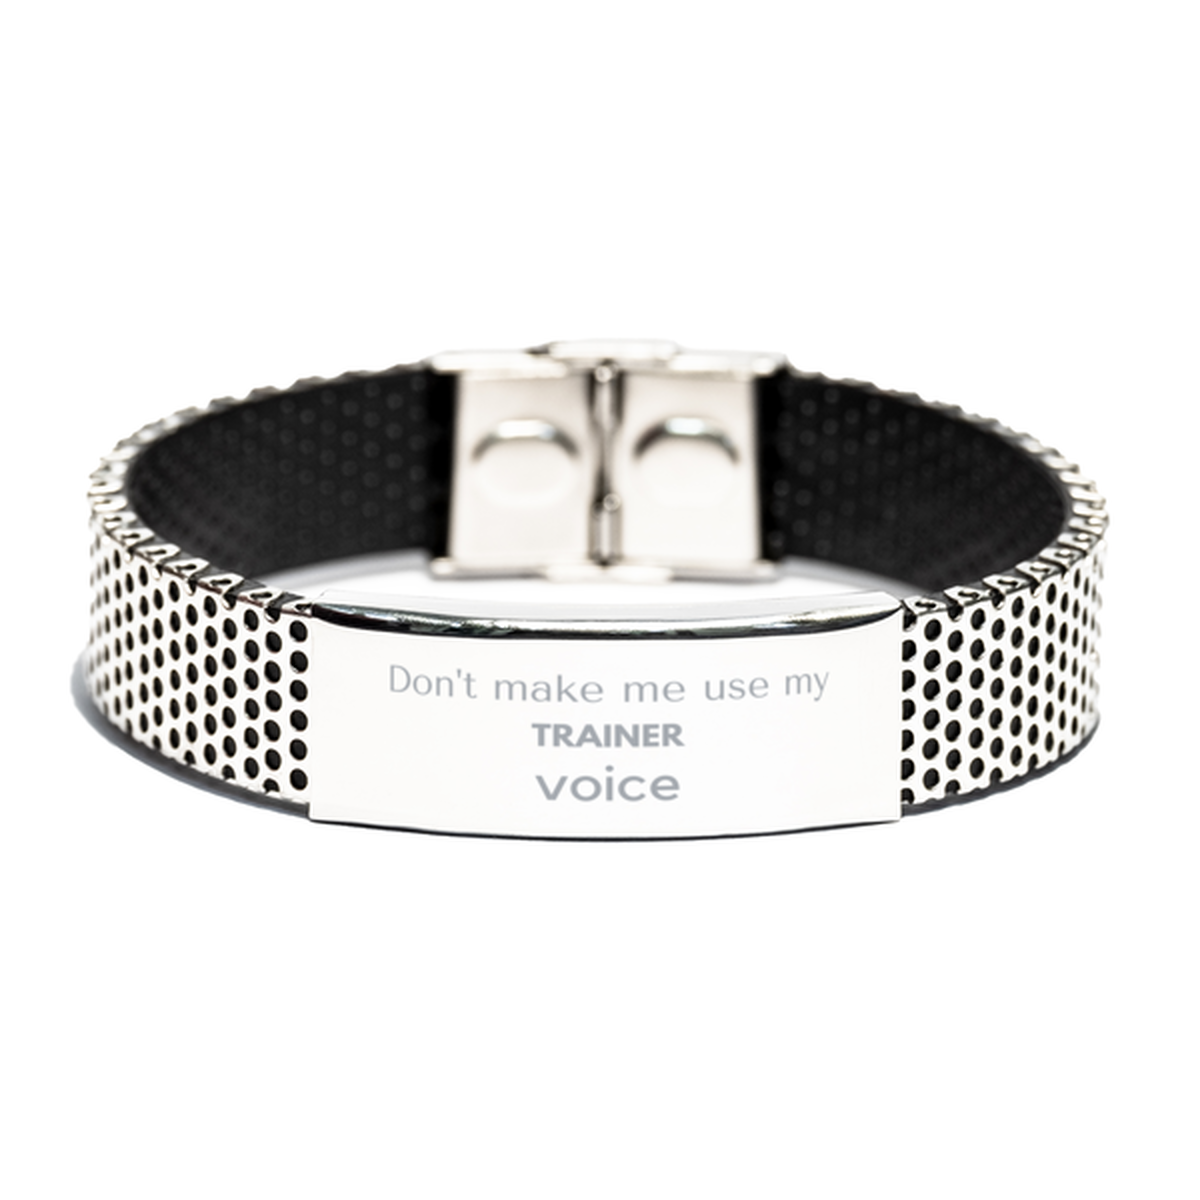 Don't make me use my Trainer voice, Sarcasm Trainer Gifts, Christmas Trainer Stainless Steel Bracelet Birthday Unique Gifts For Trainer Coworkers, Men, Women, Colleague, Friends